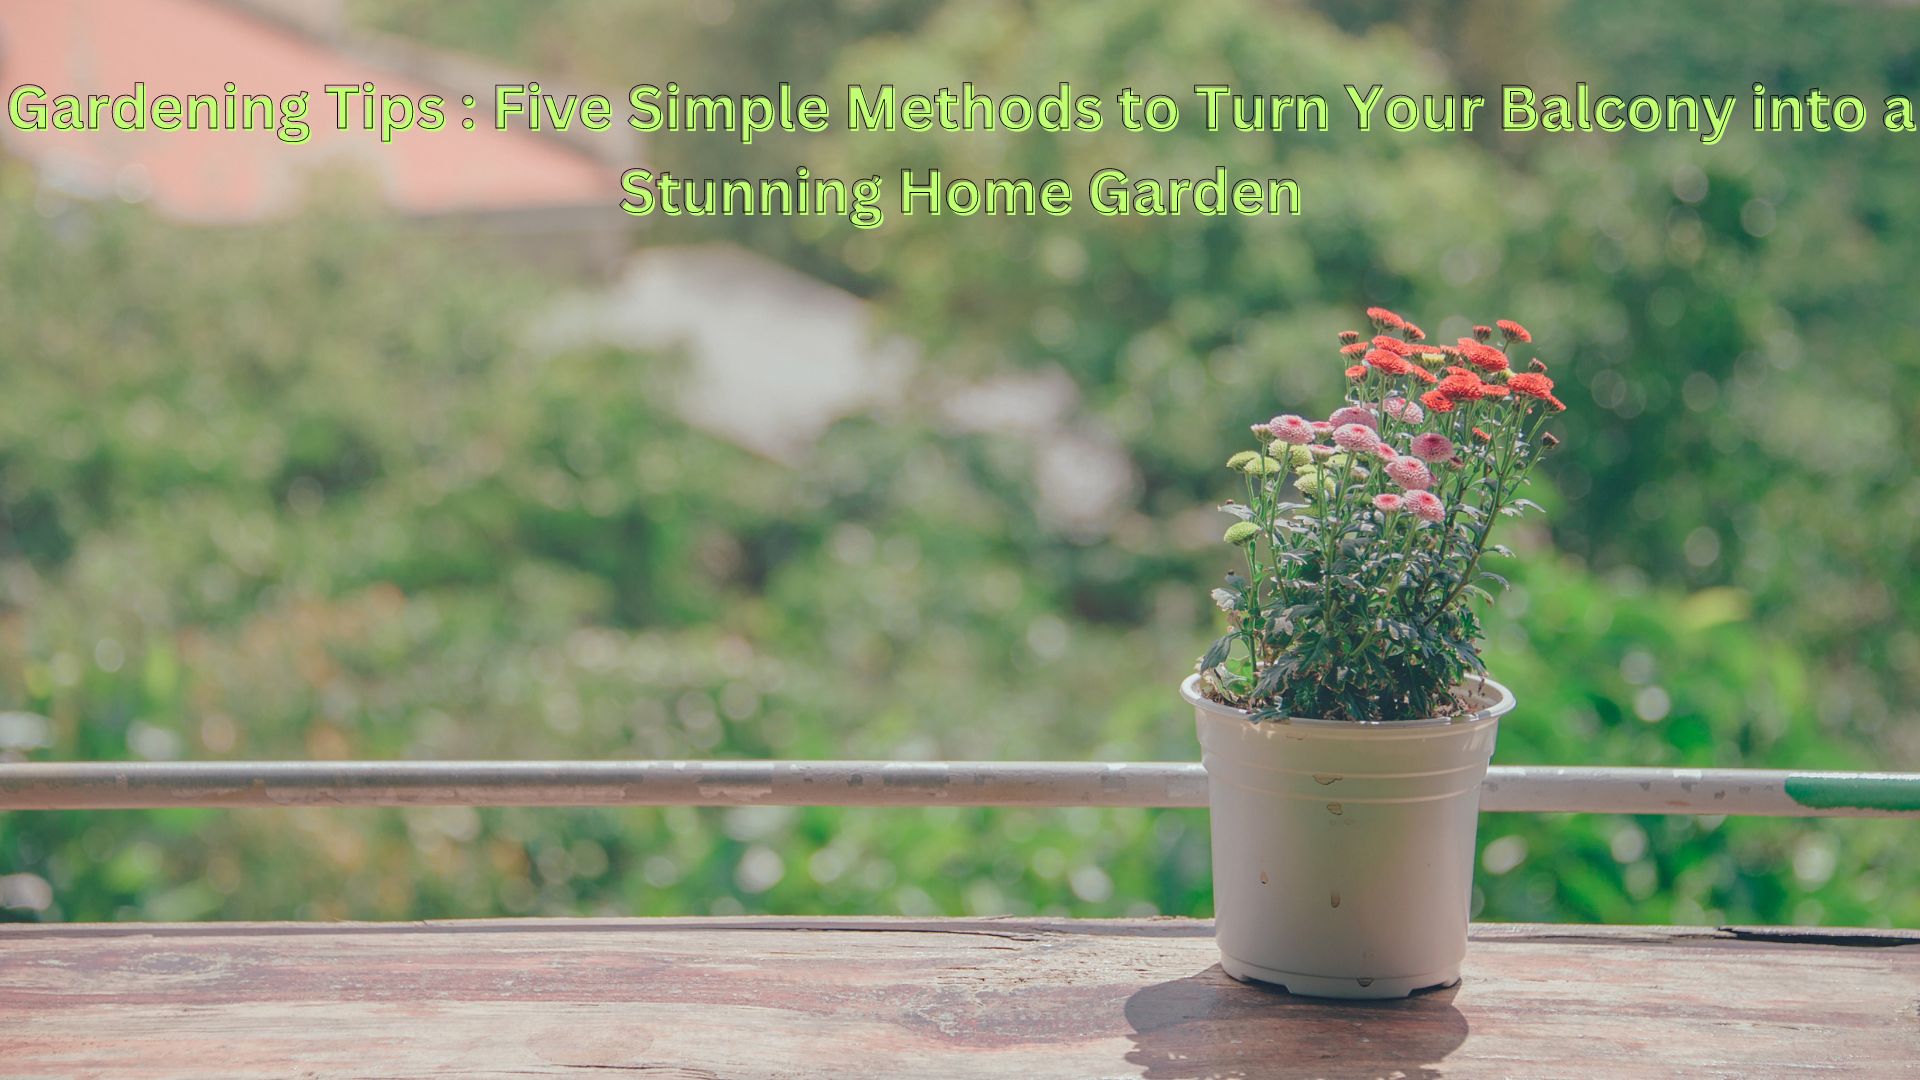 Gardening Tips : Five Simple Methods to Turn Your Balcony into a Stunning Home Garden